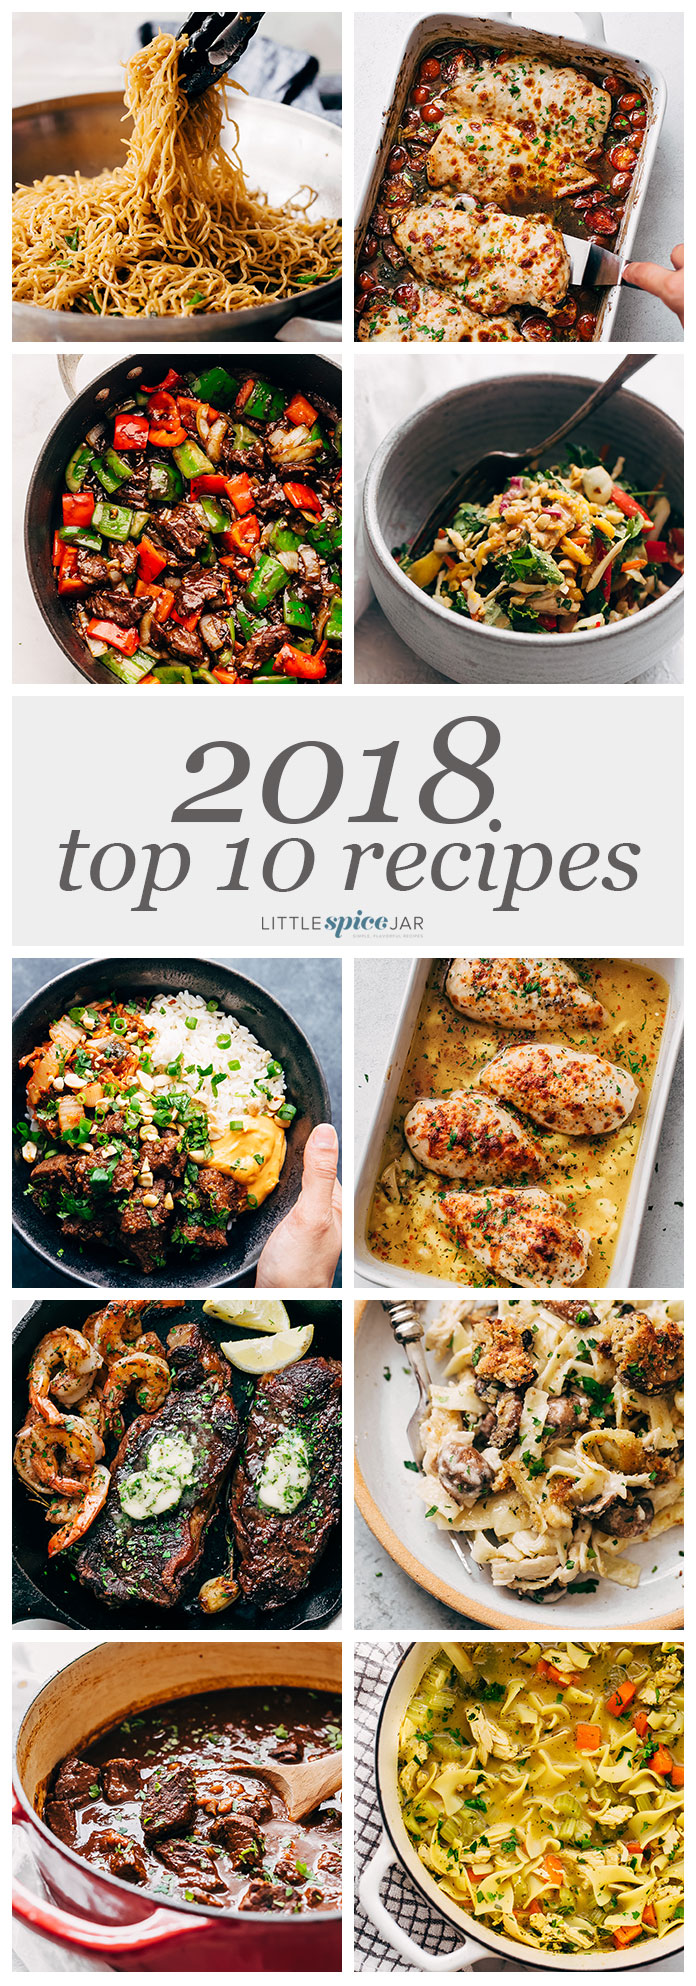 Last Goodbye 2018 + Top 10 Recipes of the Year - These were your favorite recipes from 2018 on Little Spice Jar! #top10recipes #2018top10recipes #top10 #recipes | Littlespicejar.com